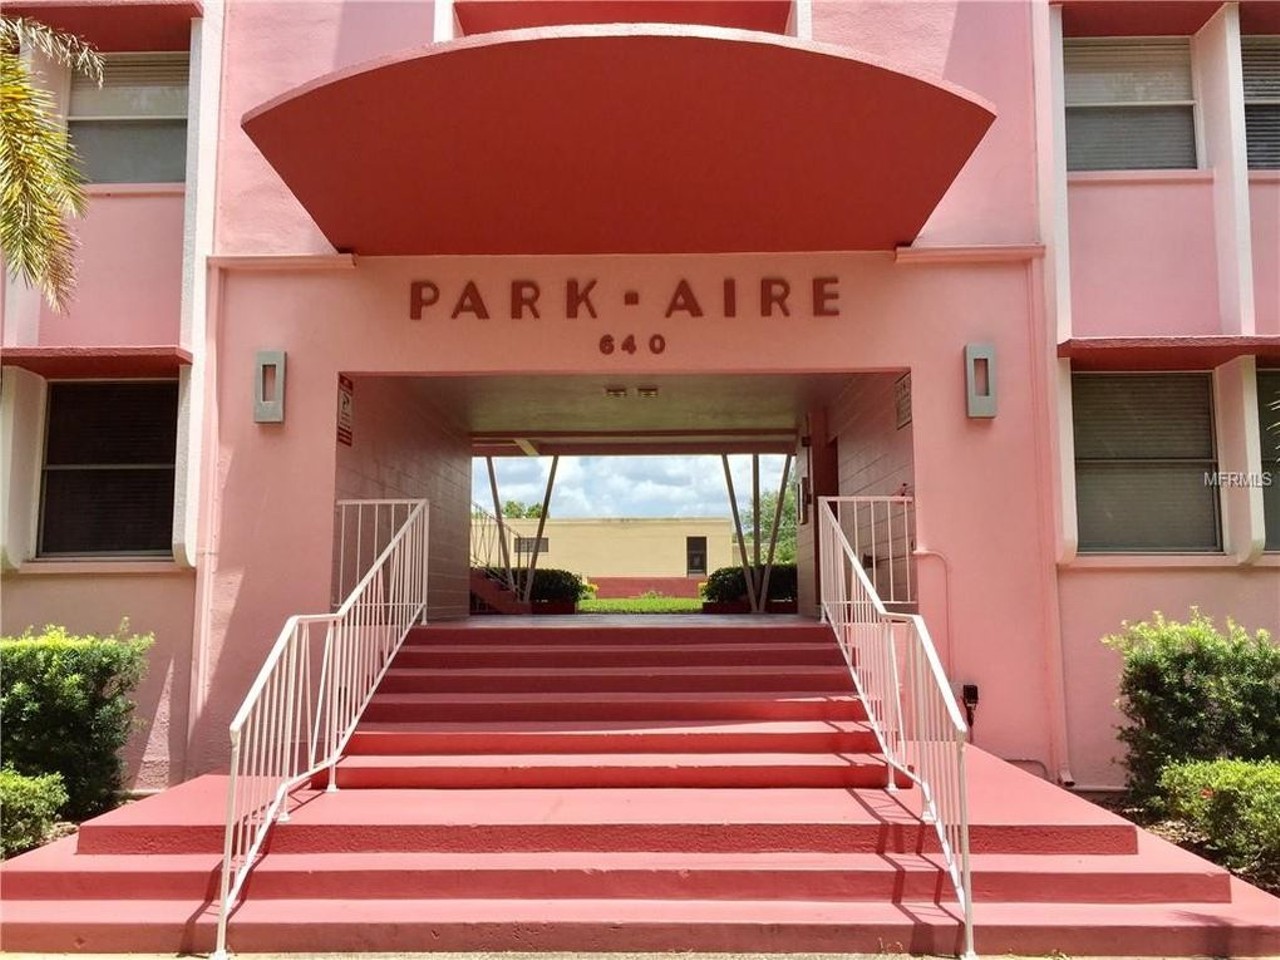 Park Aire Apartments Entrance 
640 N. Park Ave.
Baker-Miller pink, the tone of pink that&#146;s known for its calming effect, is splattered all across the Park Aire. The entrance has been used by musicians and Instagrammers alike who want to capture the unique vintage aesthetic. 
Photo via Realtor.com